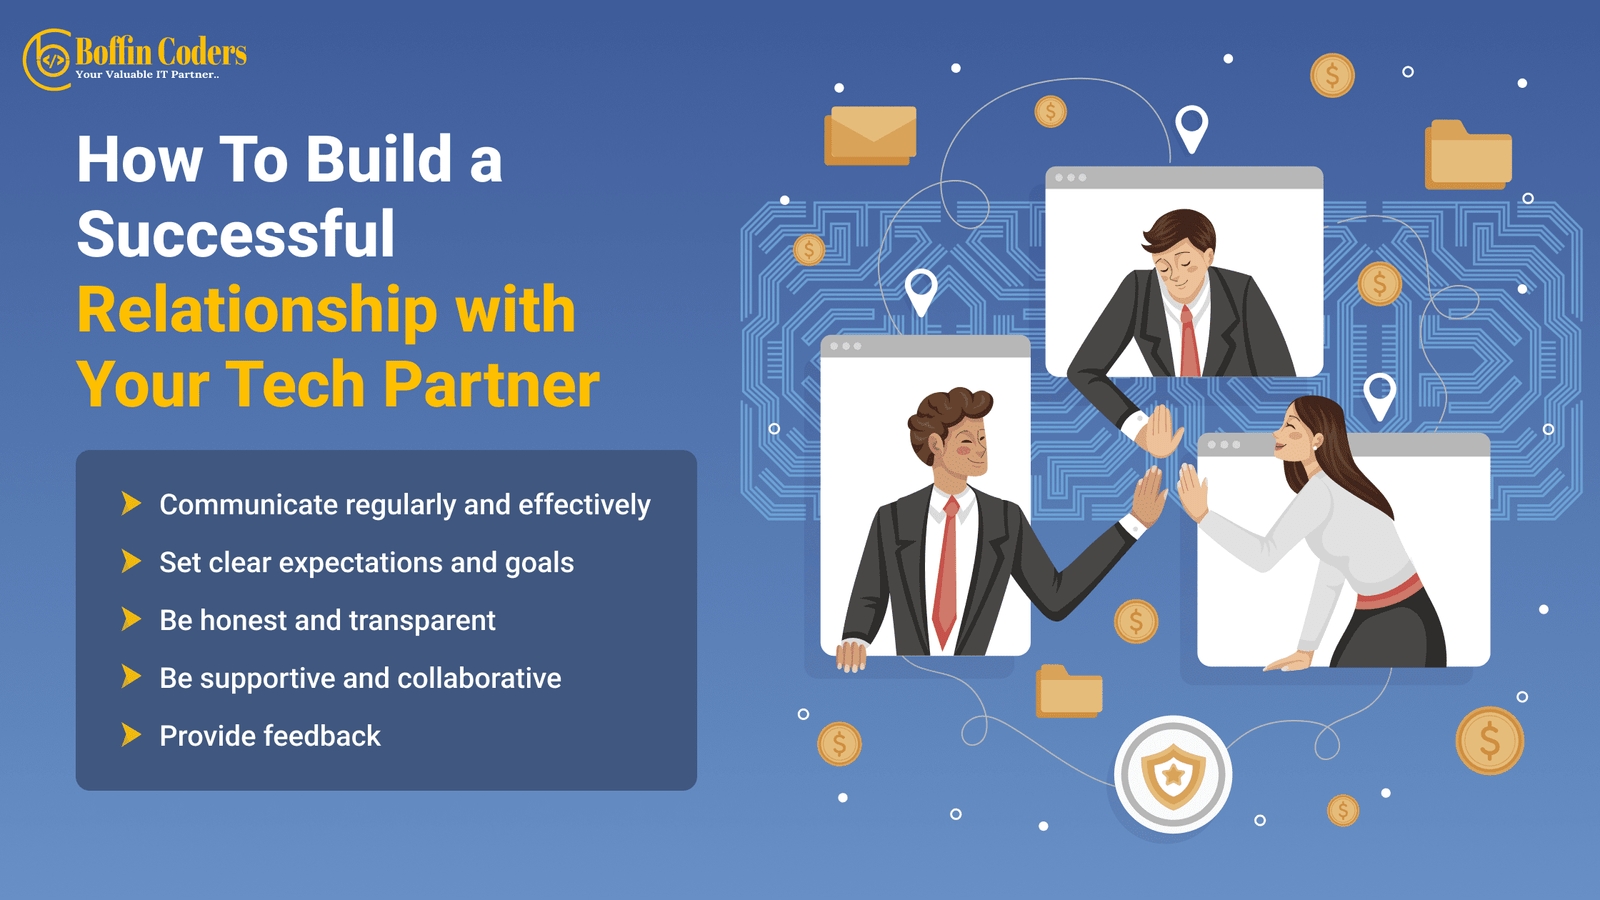 How To Build a Successful Relationship with Your Tech Partner